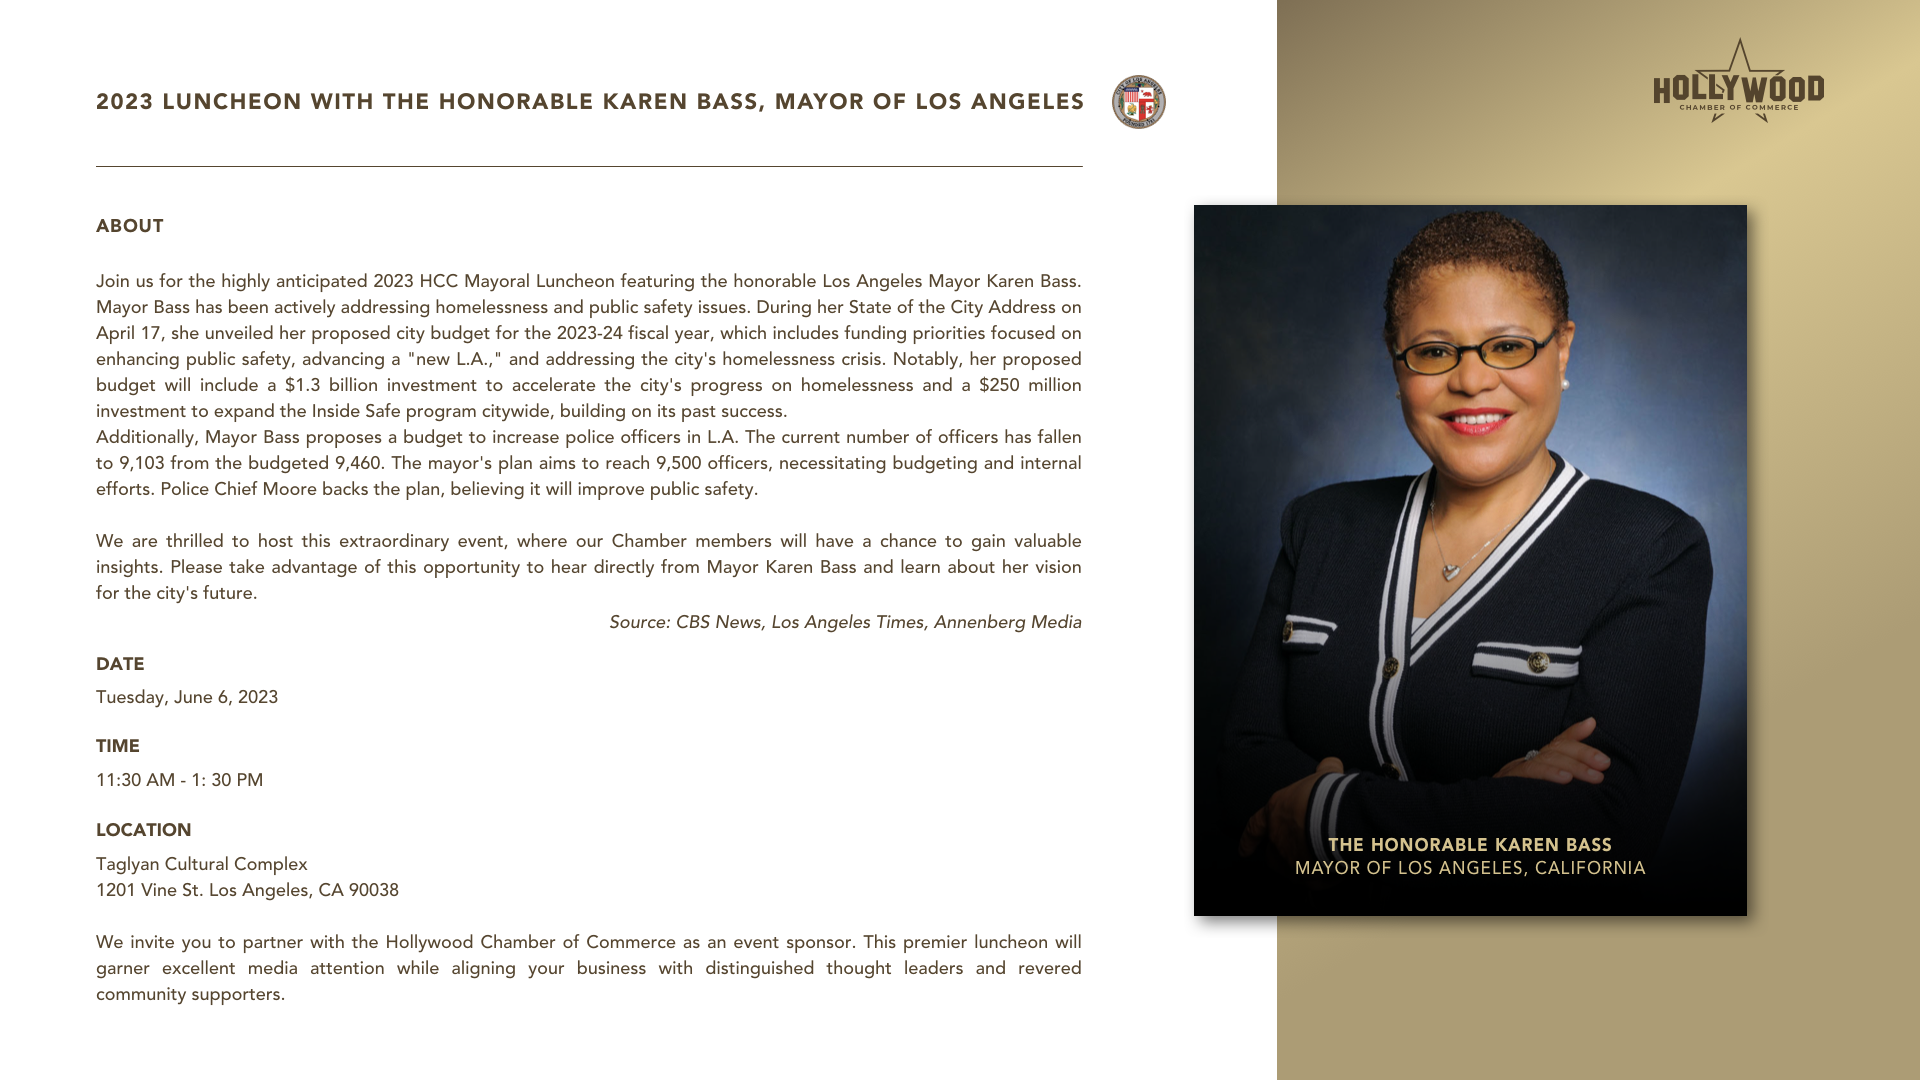 HOLLYWOOD CHAMBER OF COMMERCE Luncheon with Karen Bass